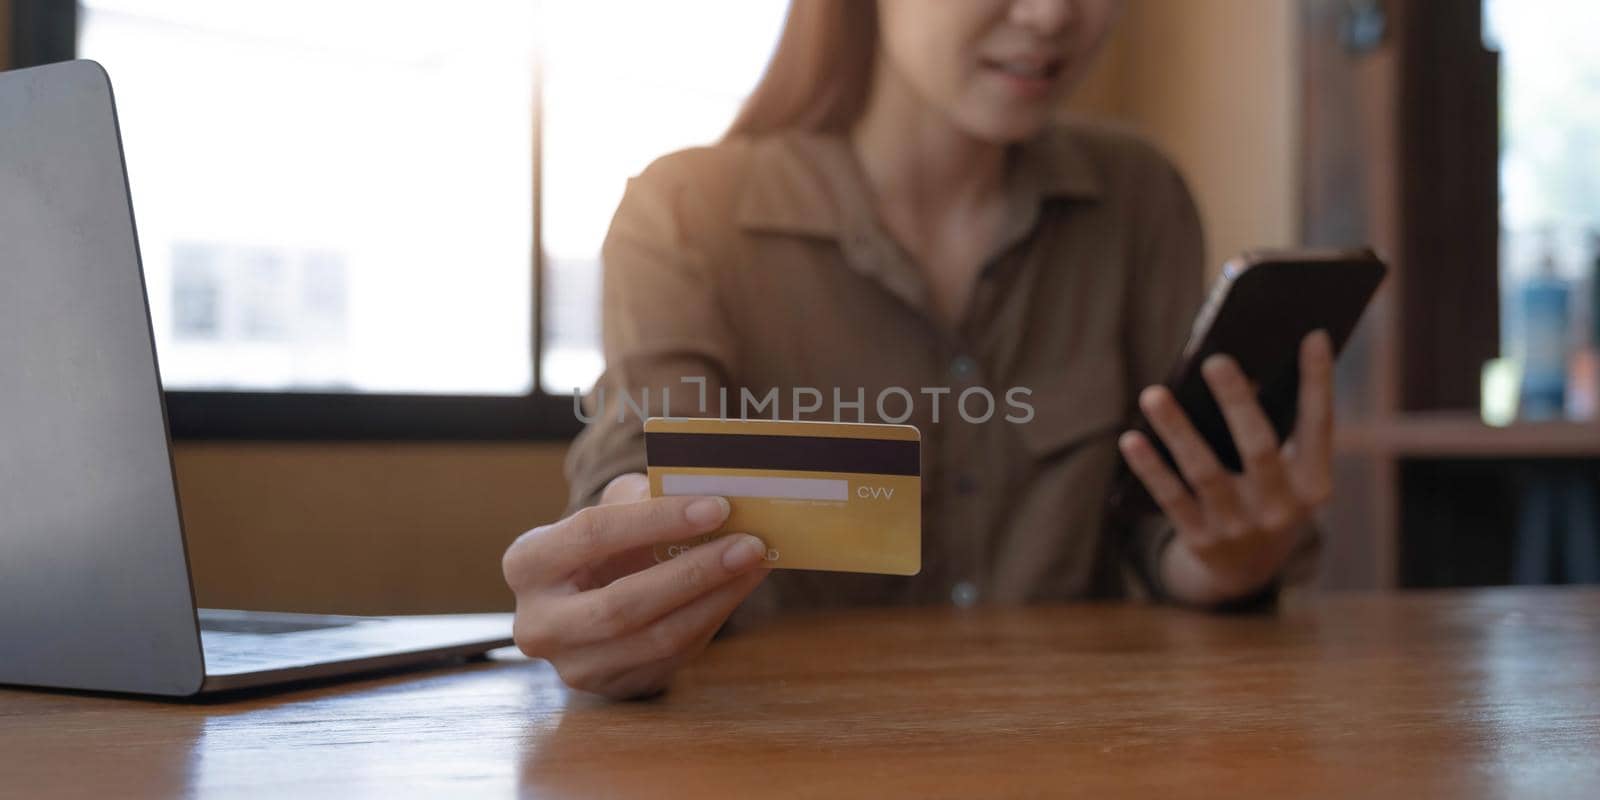 Closeup image of a woman's hand holding credit card and pressing at mobile phone on wooden table in office.